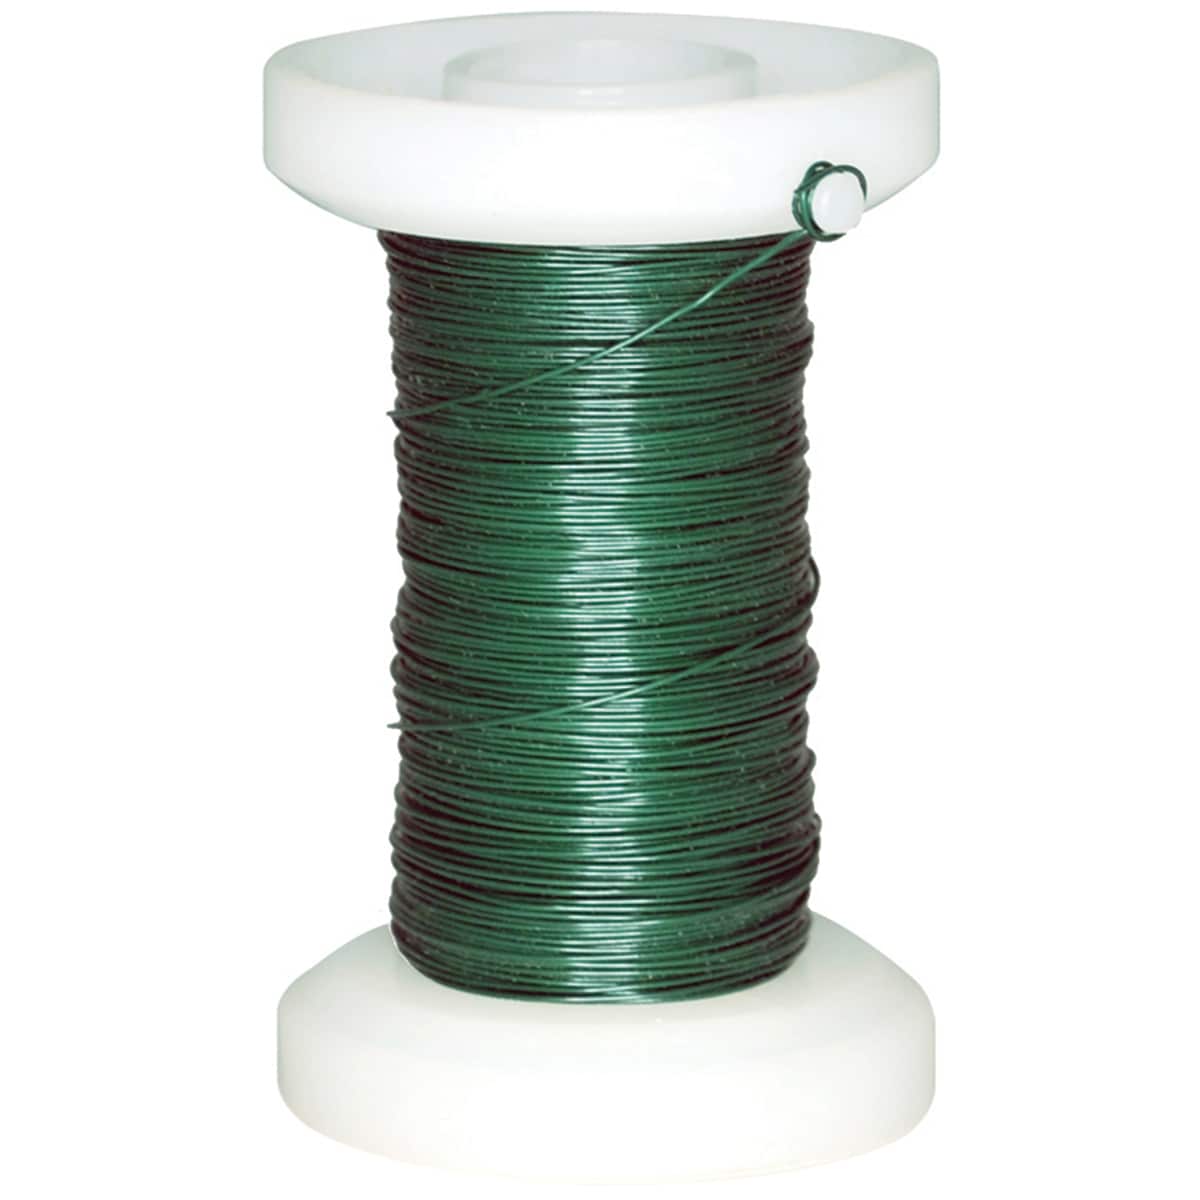 Spooled Floral Wire 30 Gauge 118' - Green - image 2 of 2